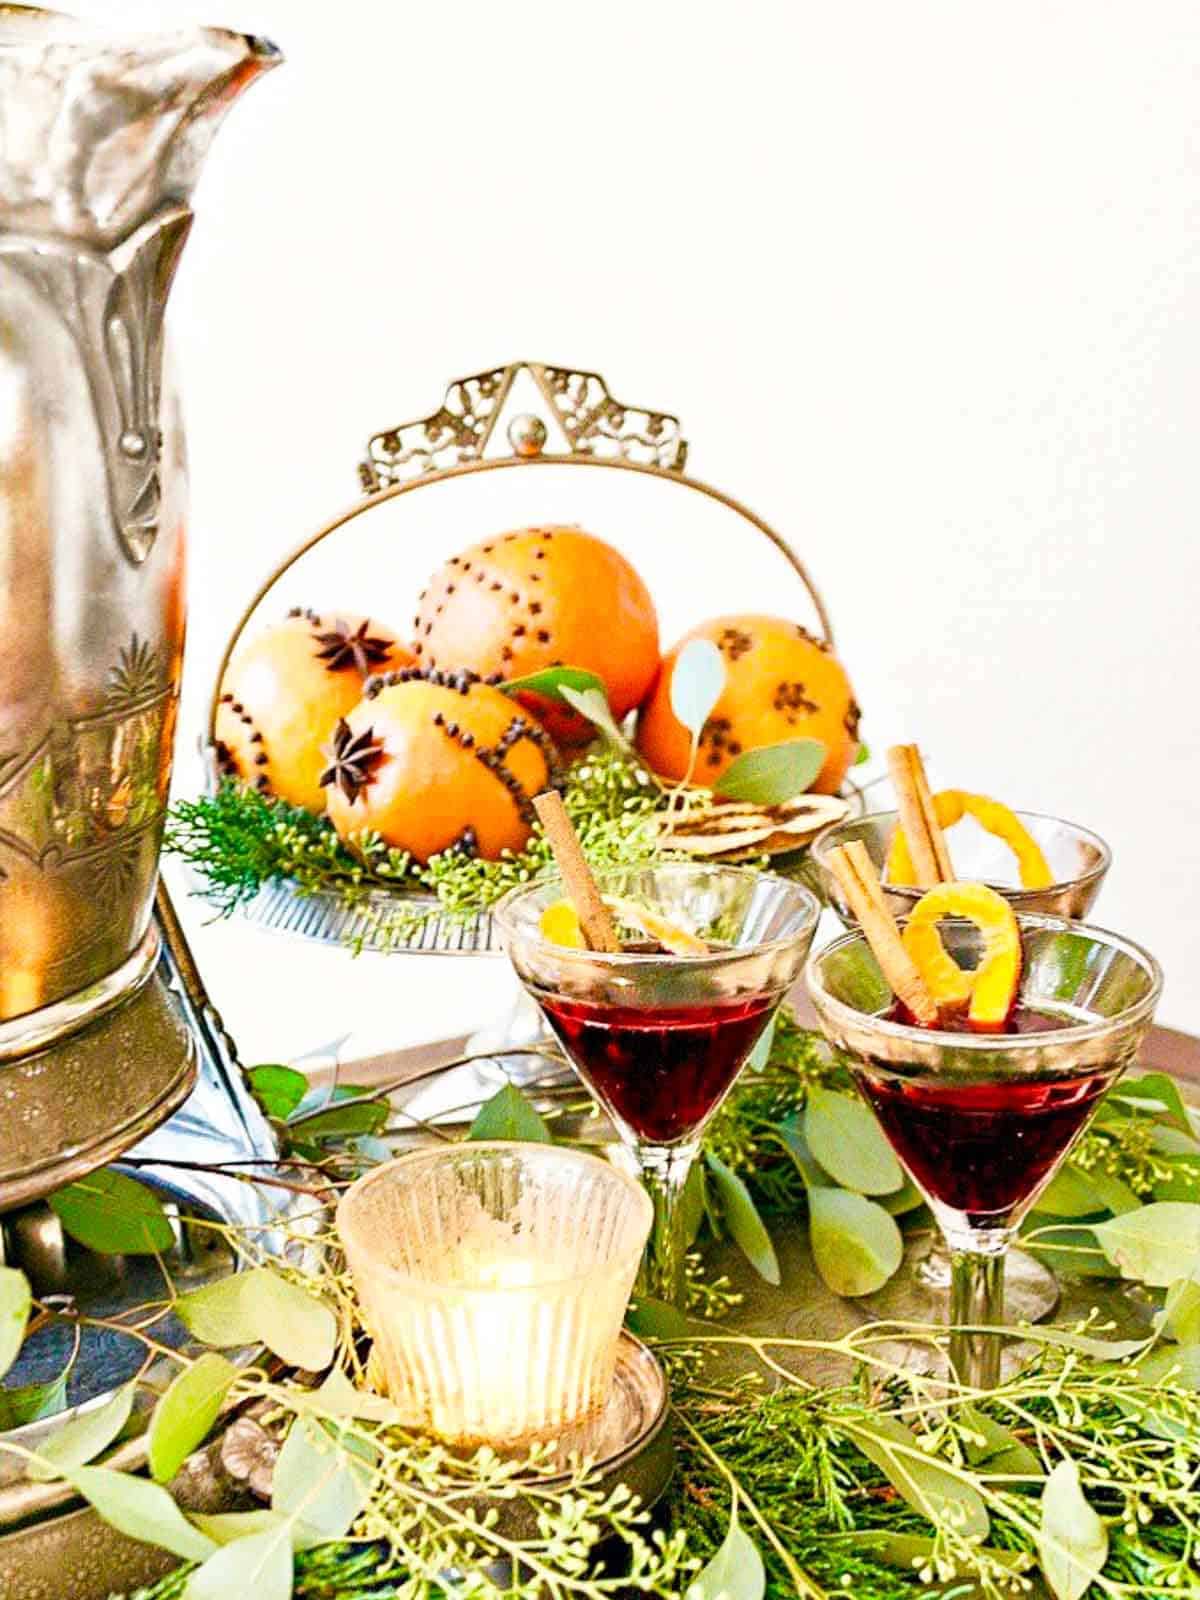 https://www.delicioustable.com/wp-content/uploads/2020/12/Mulled-Wine.jpg